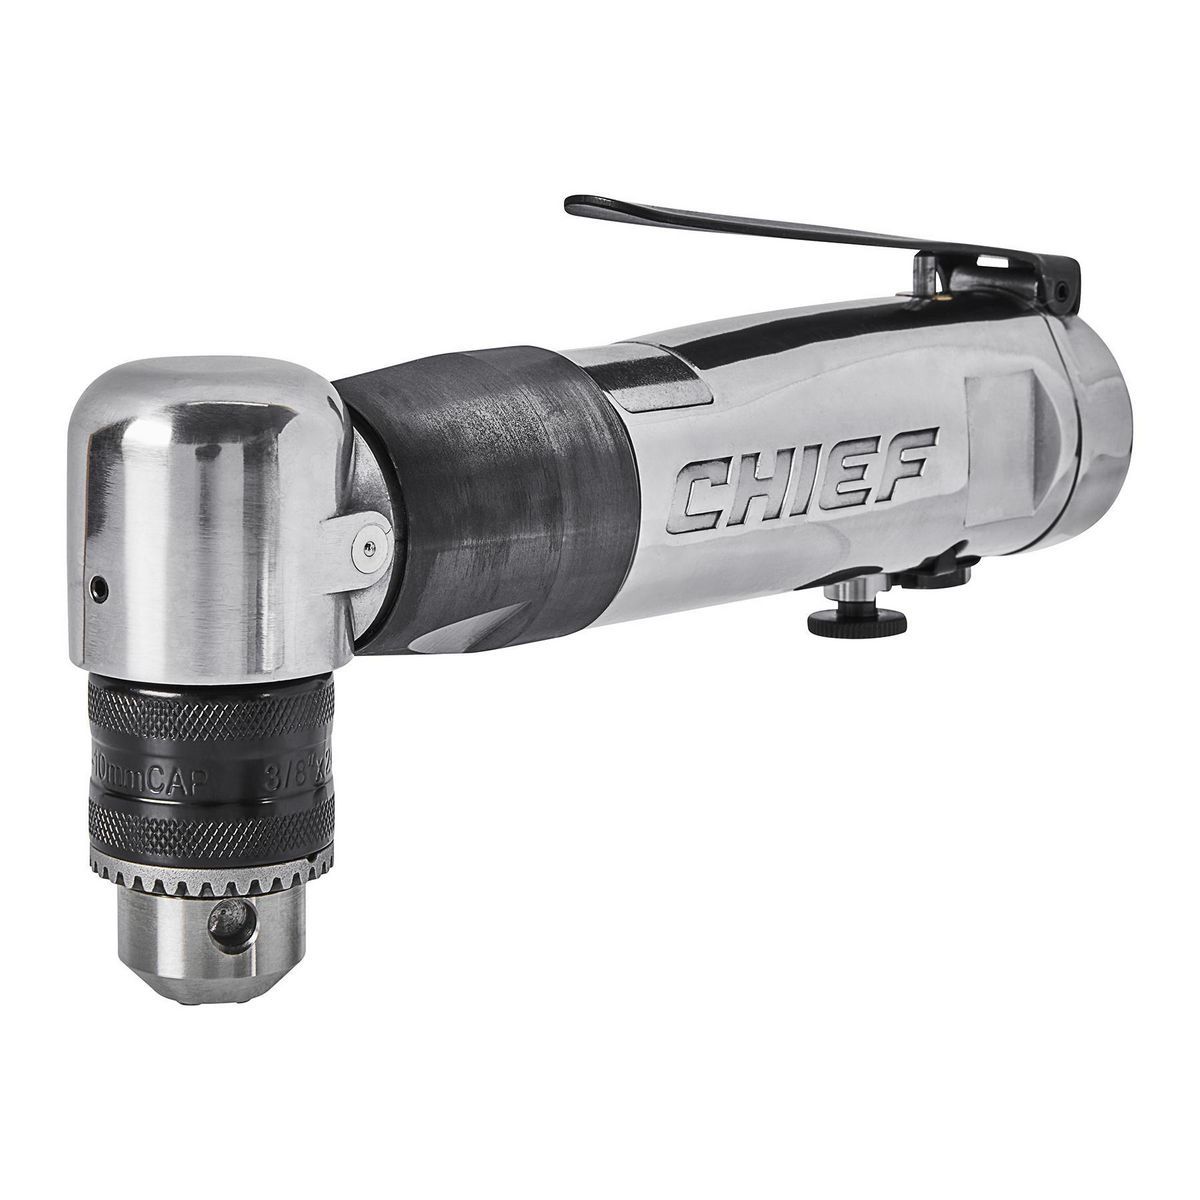 CHIEF 3/8 in. Professional Reversible Air Angle Drill